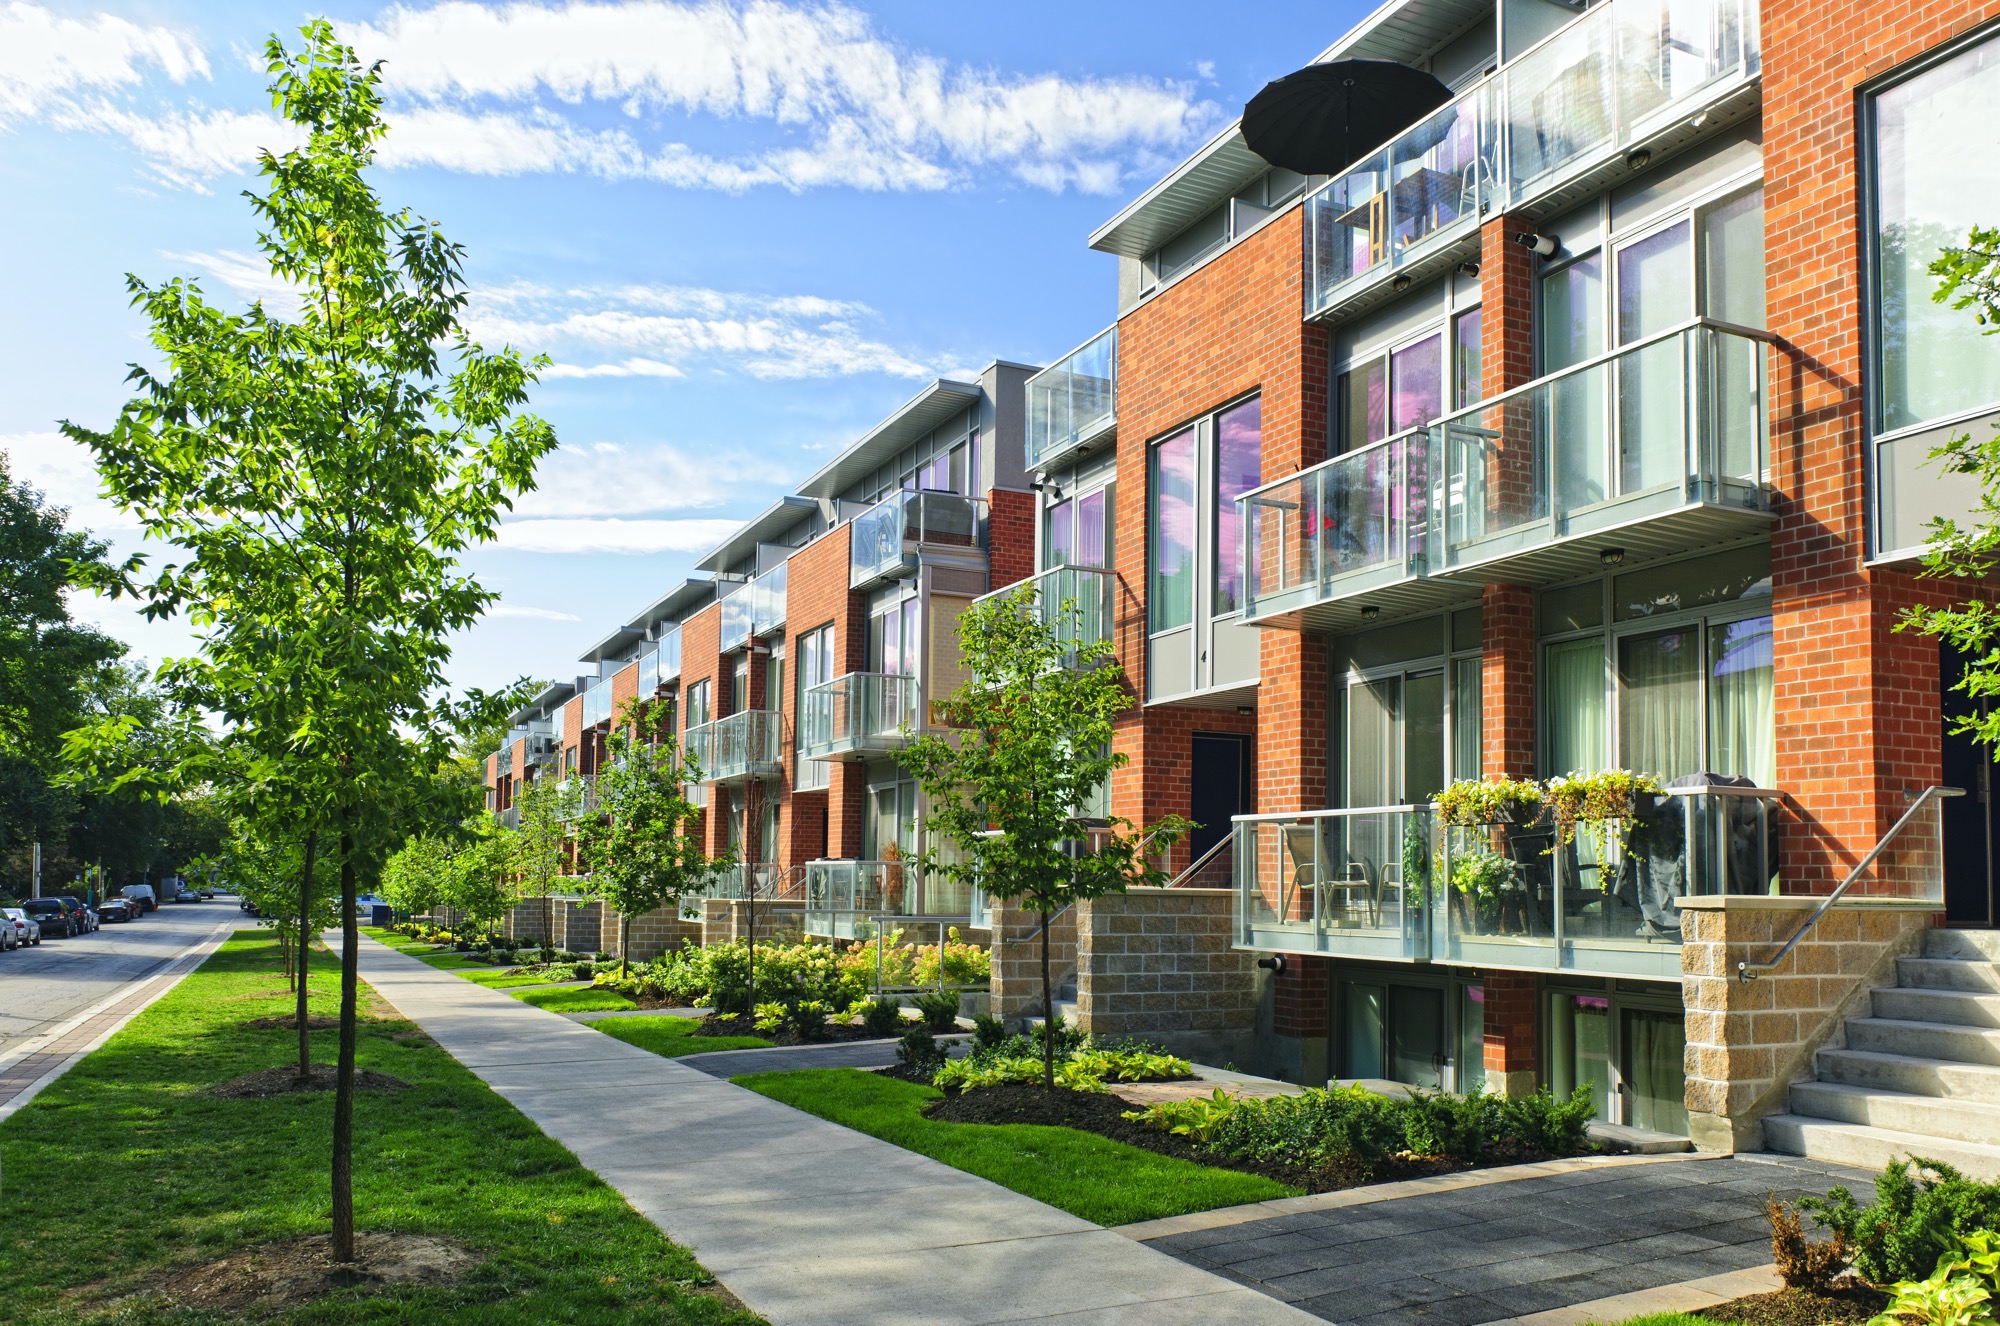 Exterior picture of modern townhomes